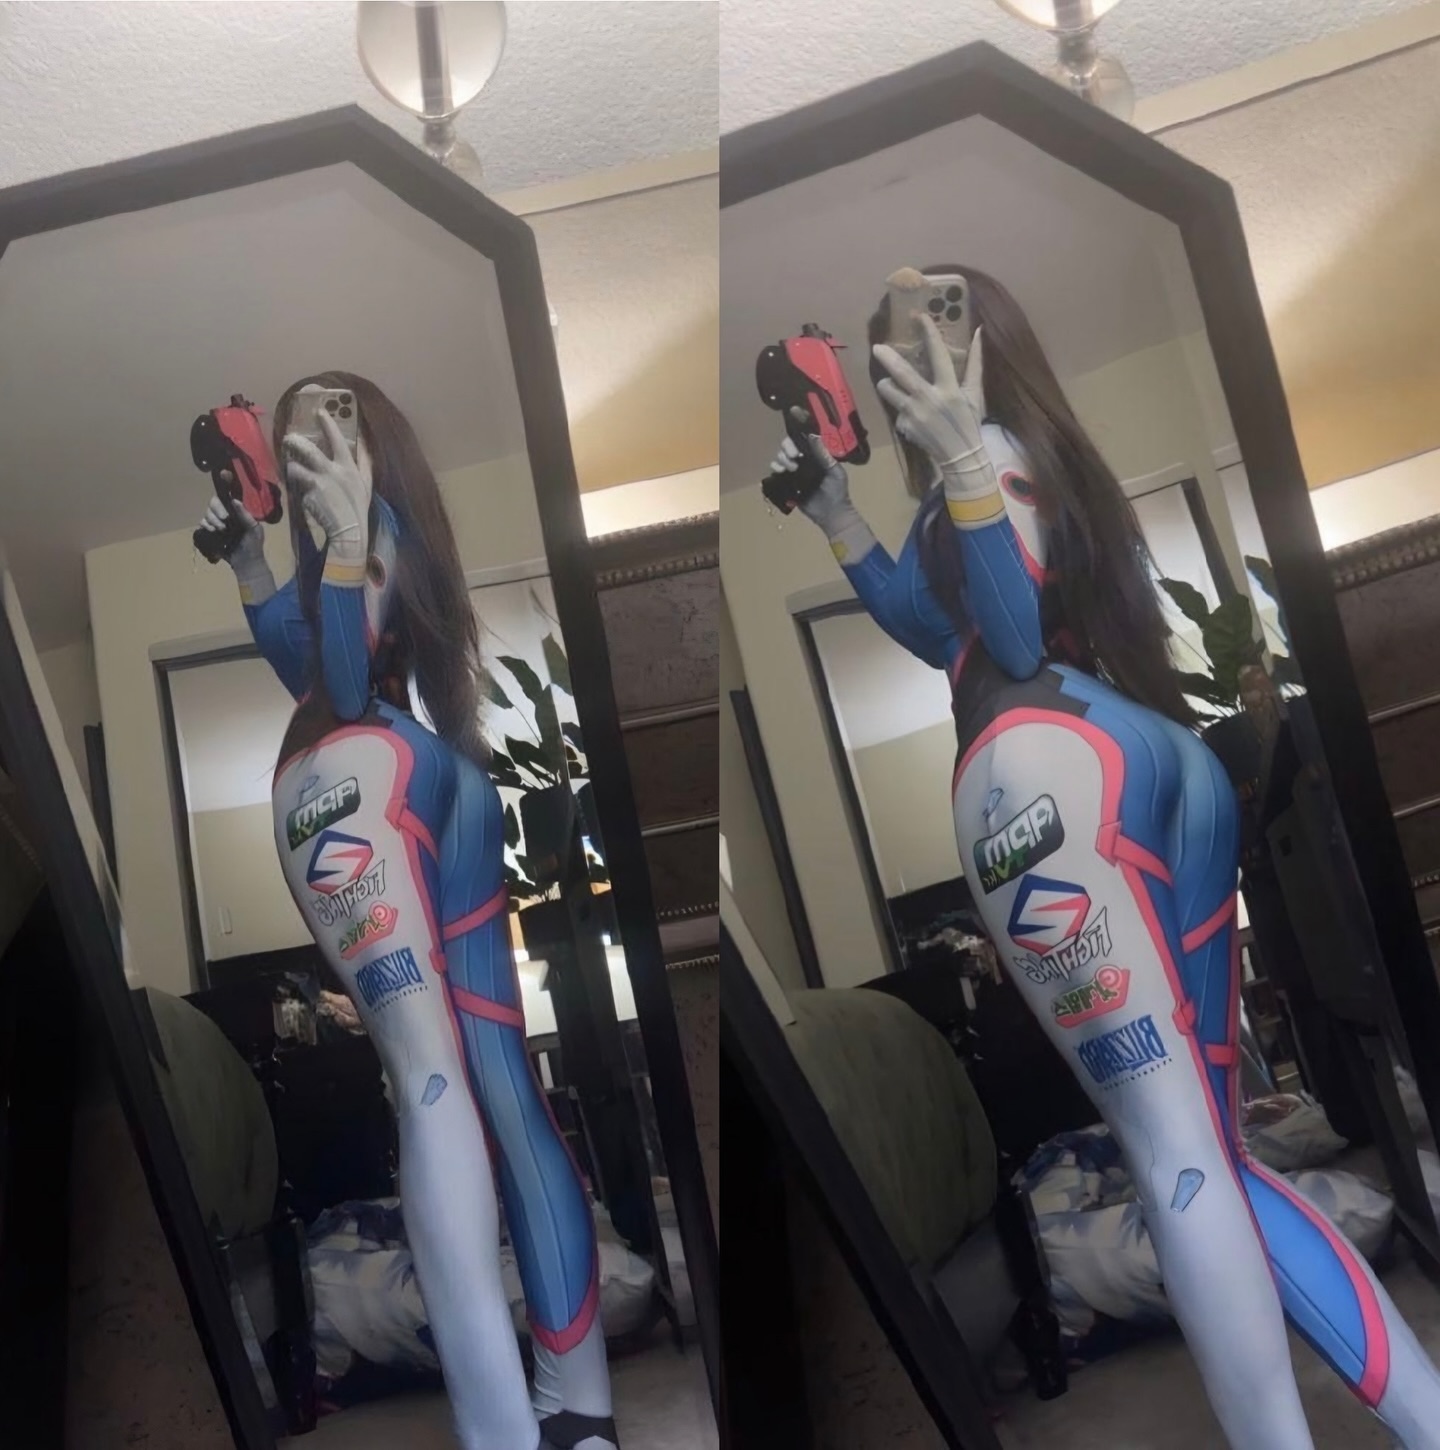 cant wait for my own place soon🖤 should be in my first apartment ever in a month💕
🐾
🐾
🐾
🐾
🐾
🐾
🐾
🐾
#dva #dvaoverwatch #overwatch #dvacosplay #overwatchcosplay